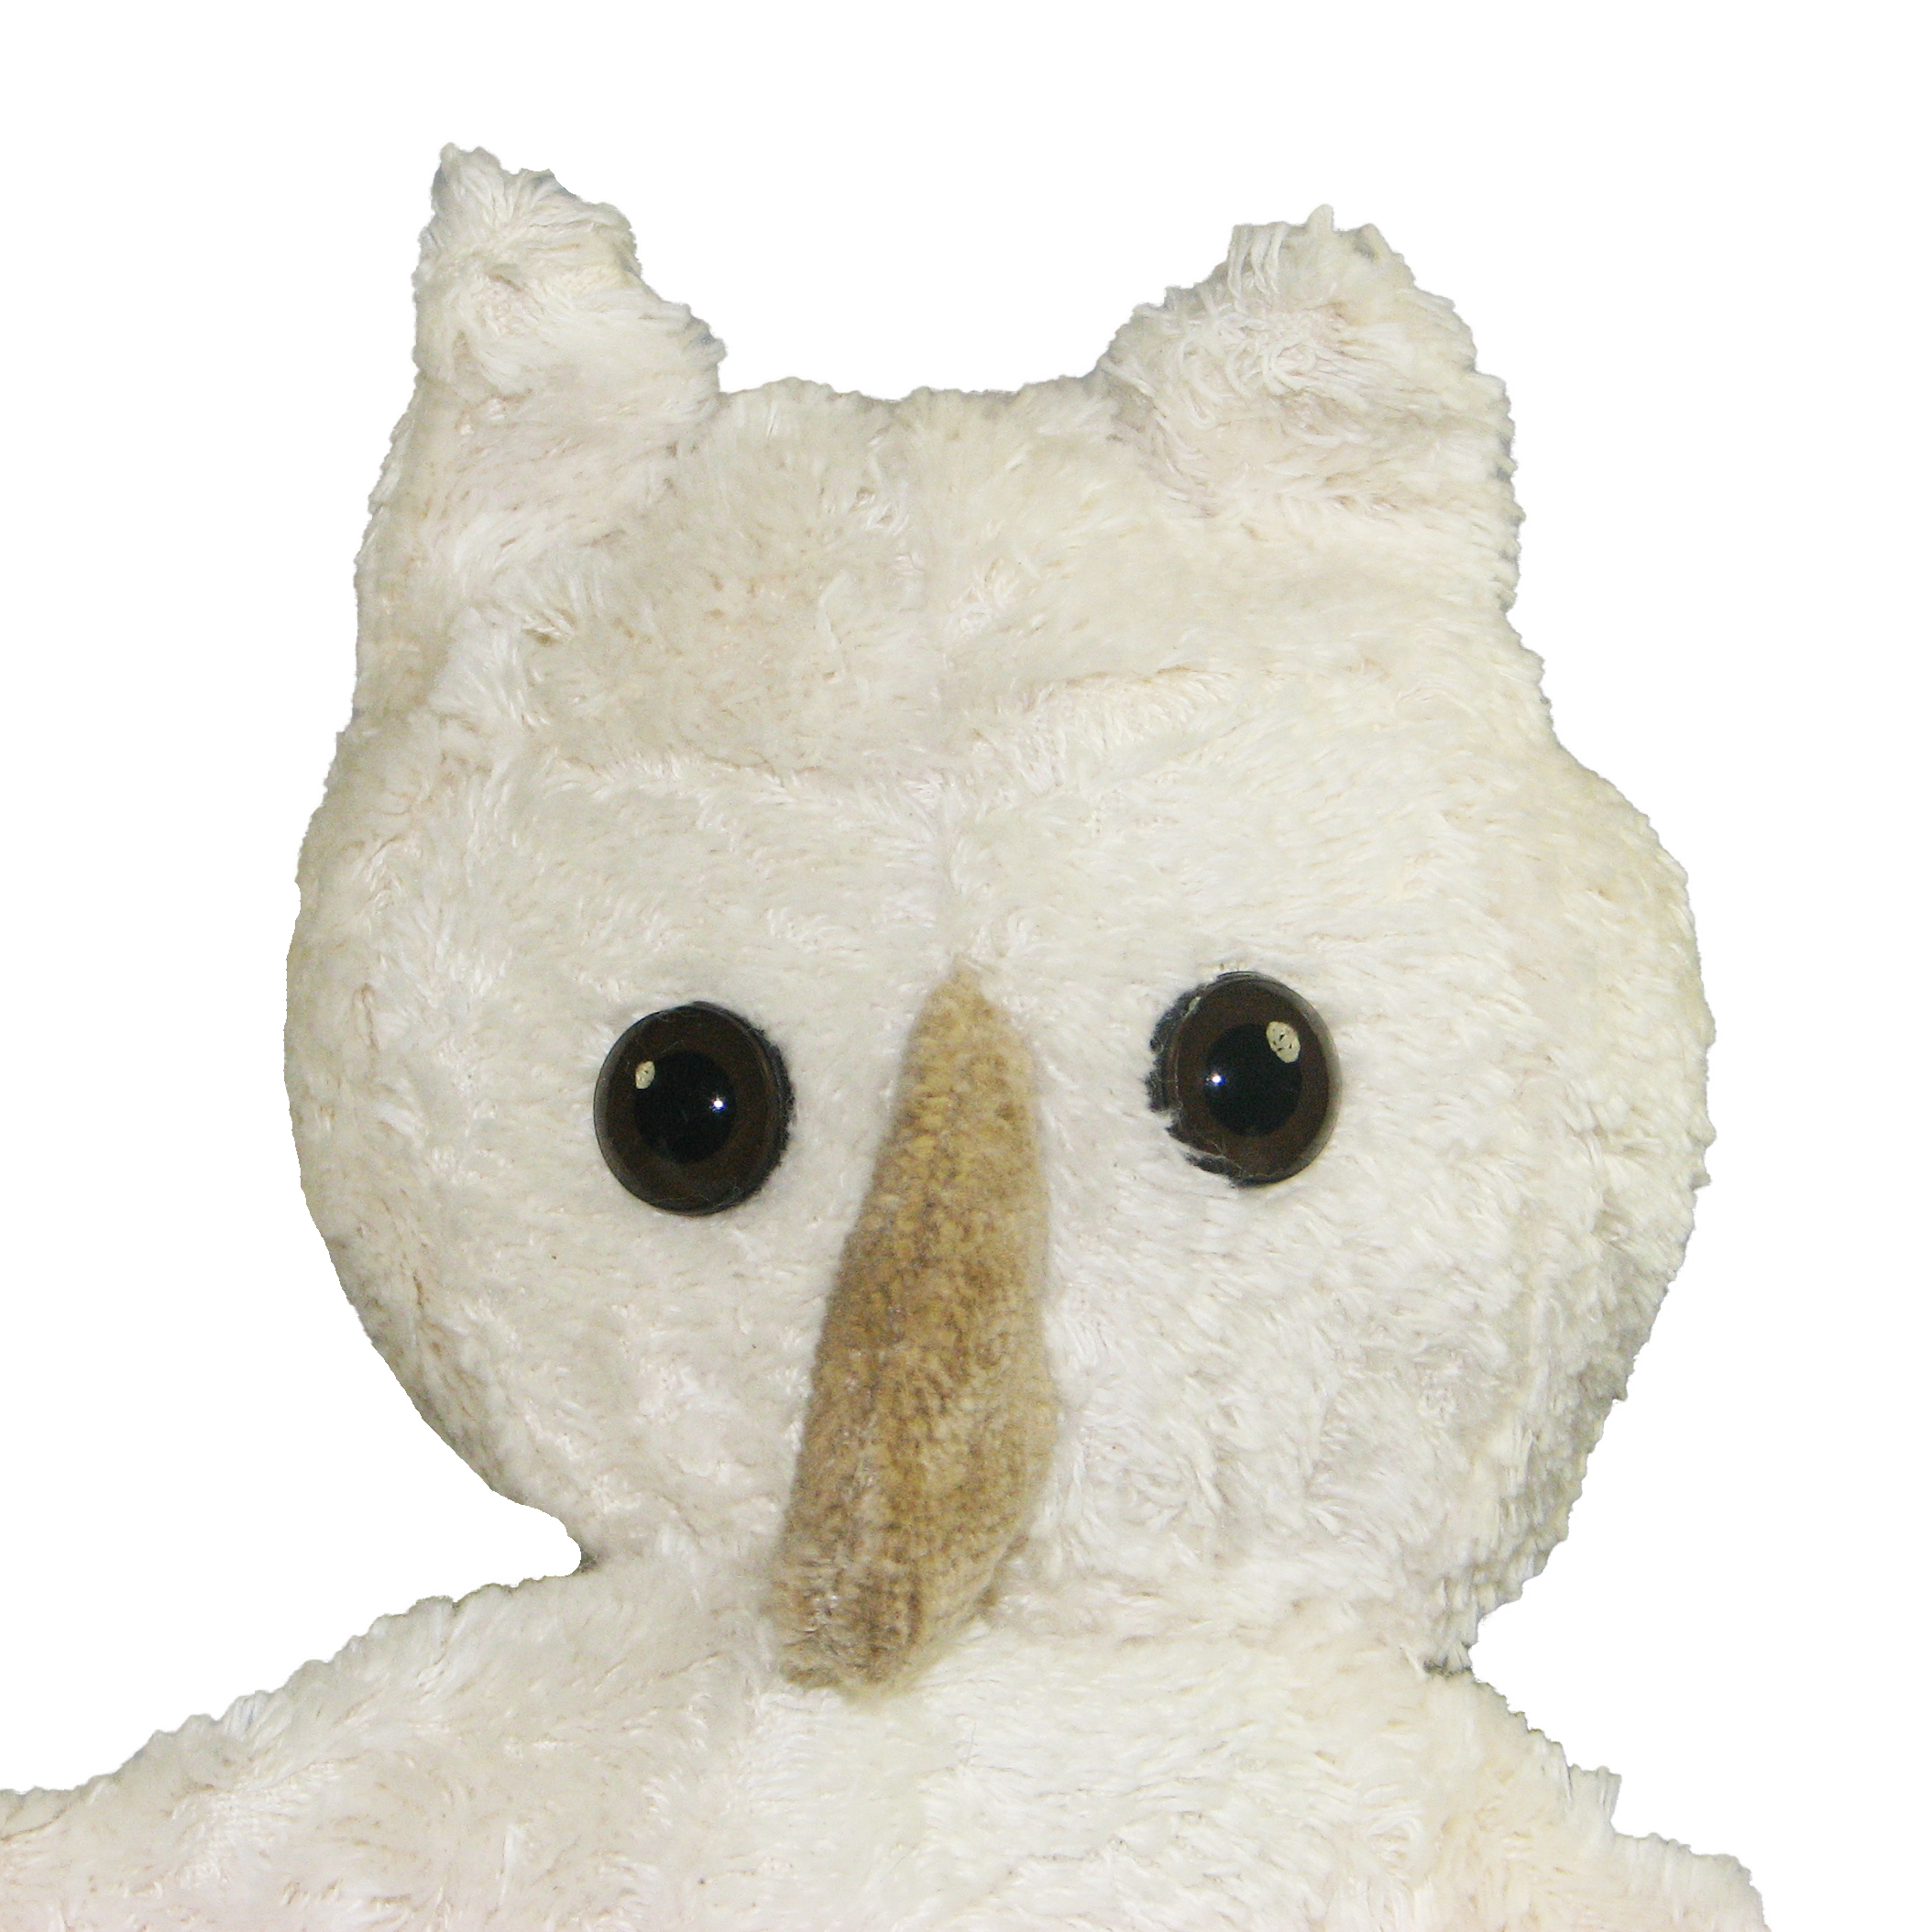 Hand puppet white owl - made of natural material - by Kallisto